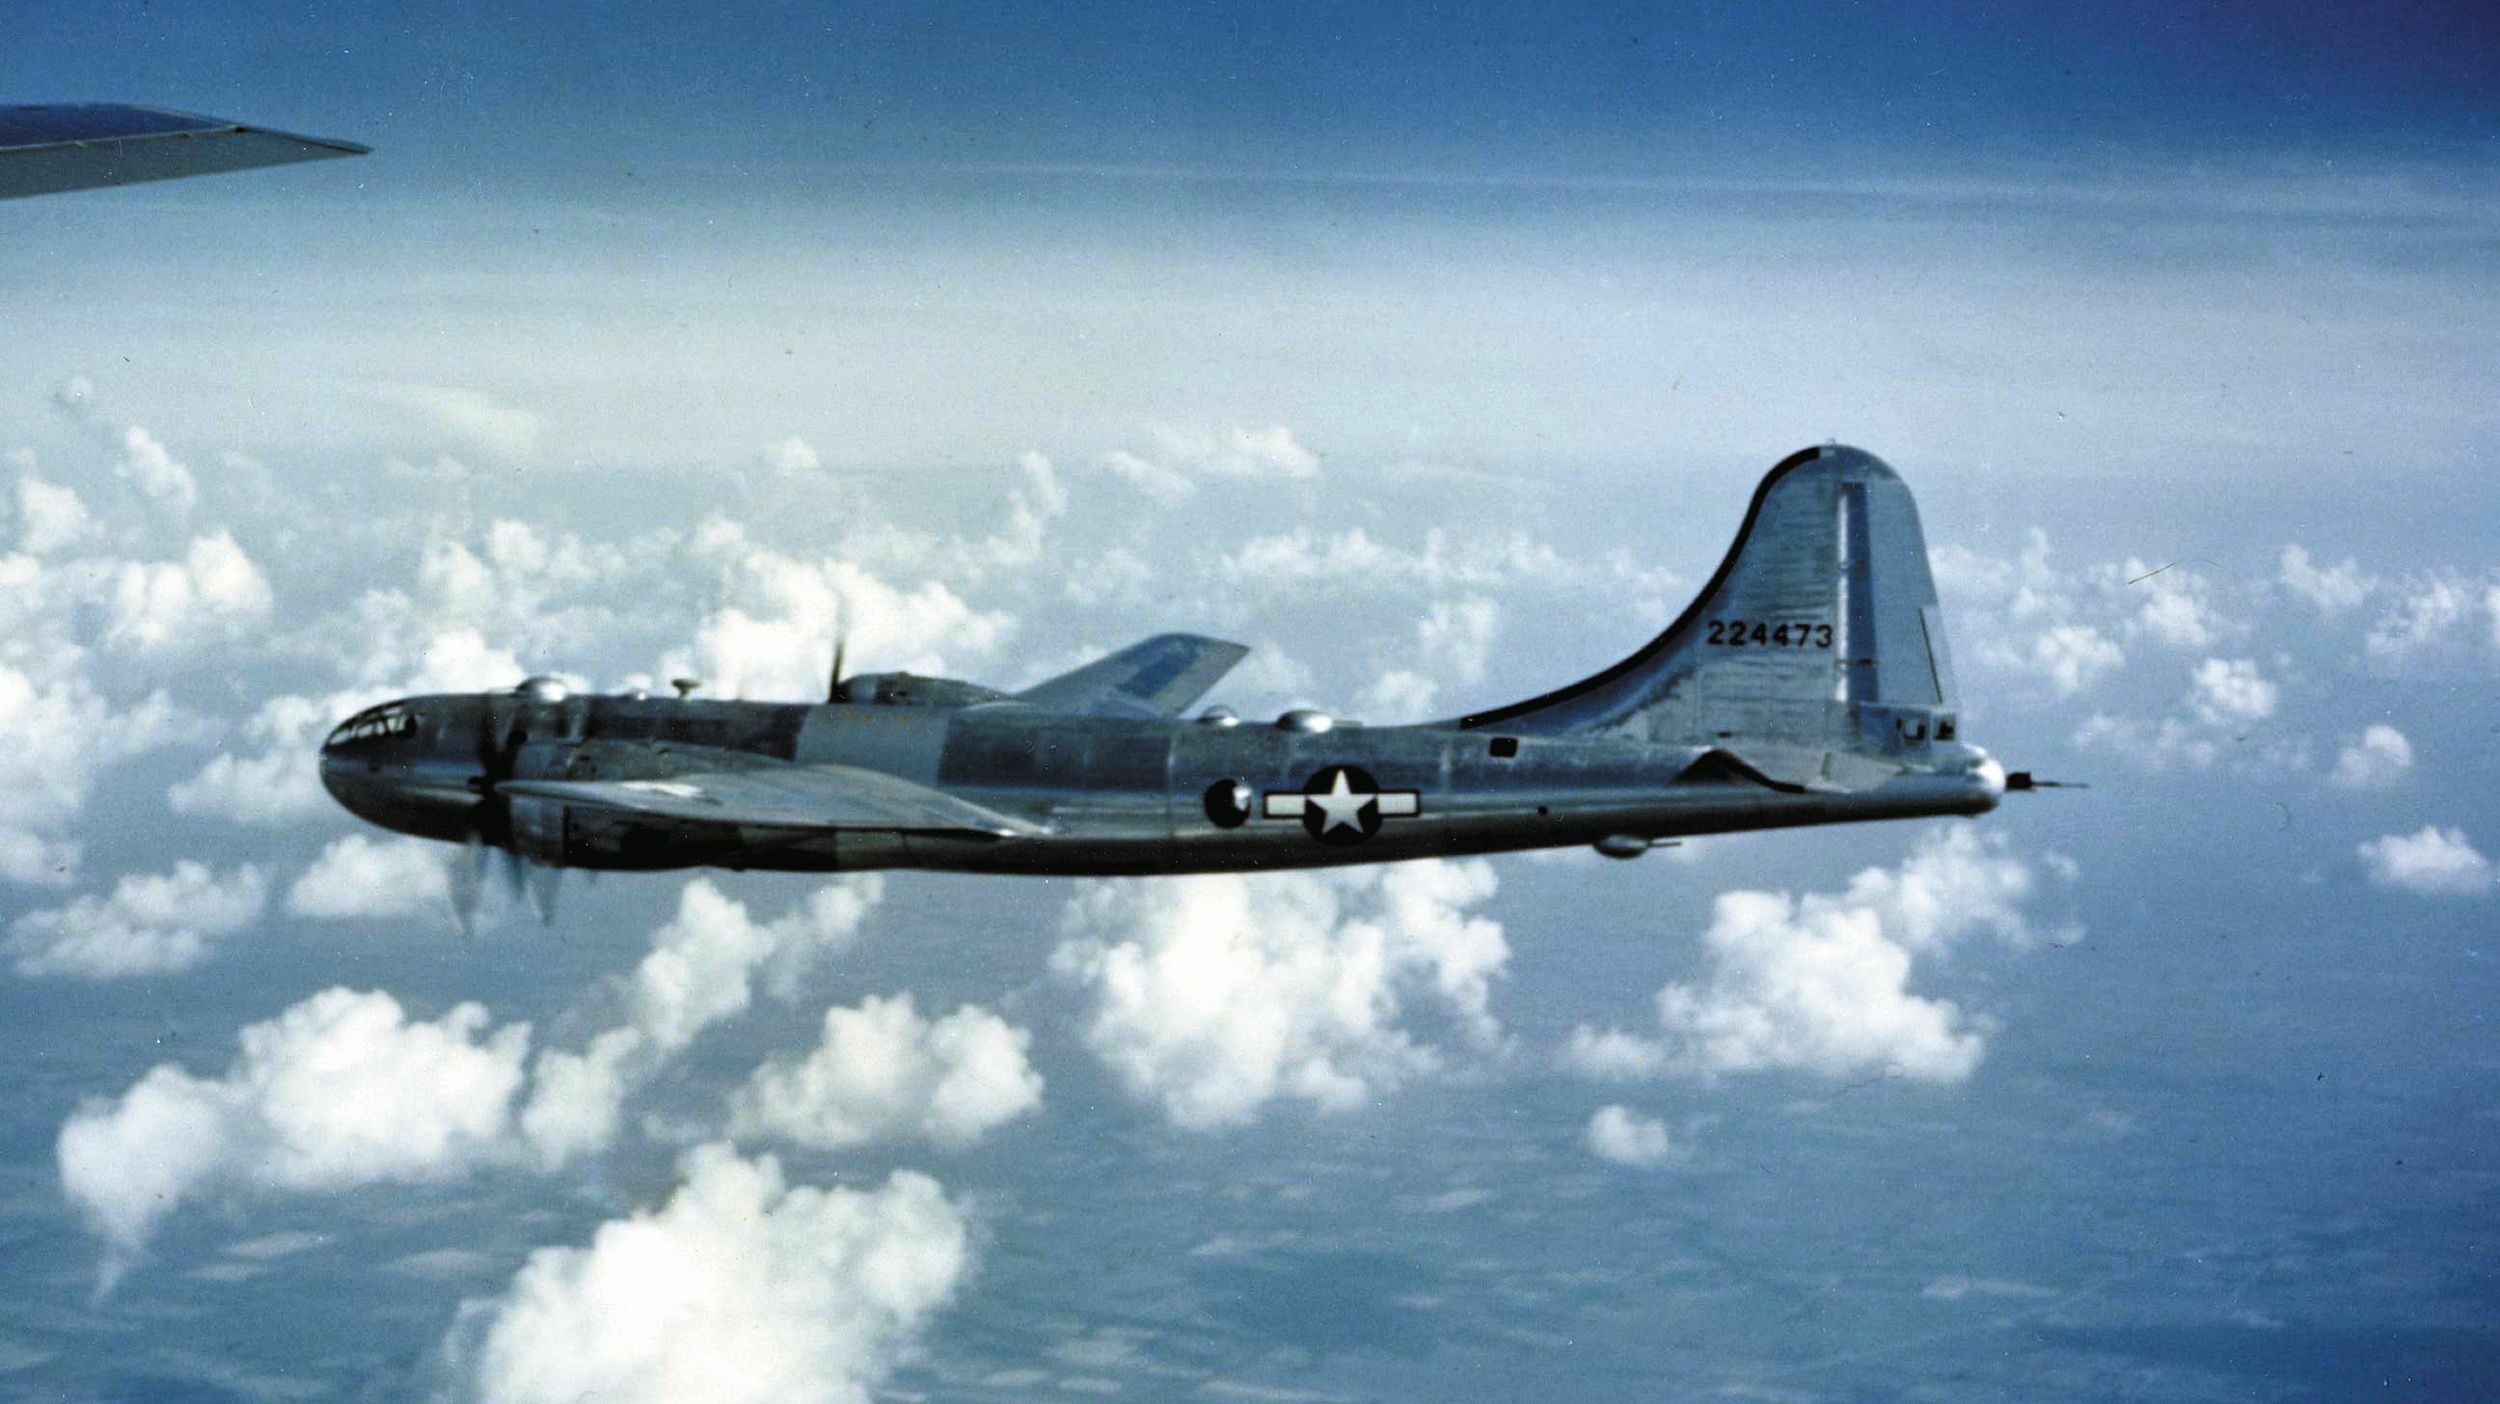 High above the clouds, a four-engine Boeing B-29 Superfortress heavy bomber wings its way toward a target in Japan.